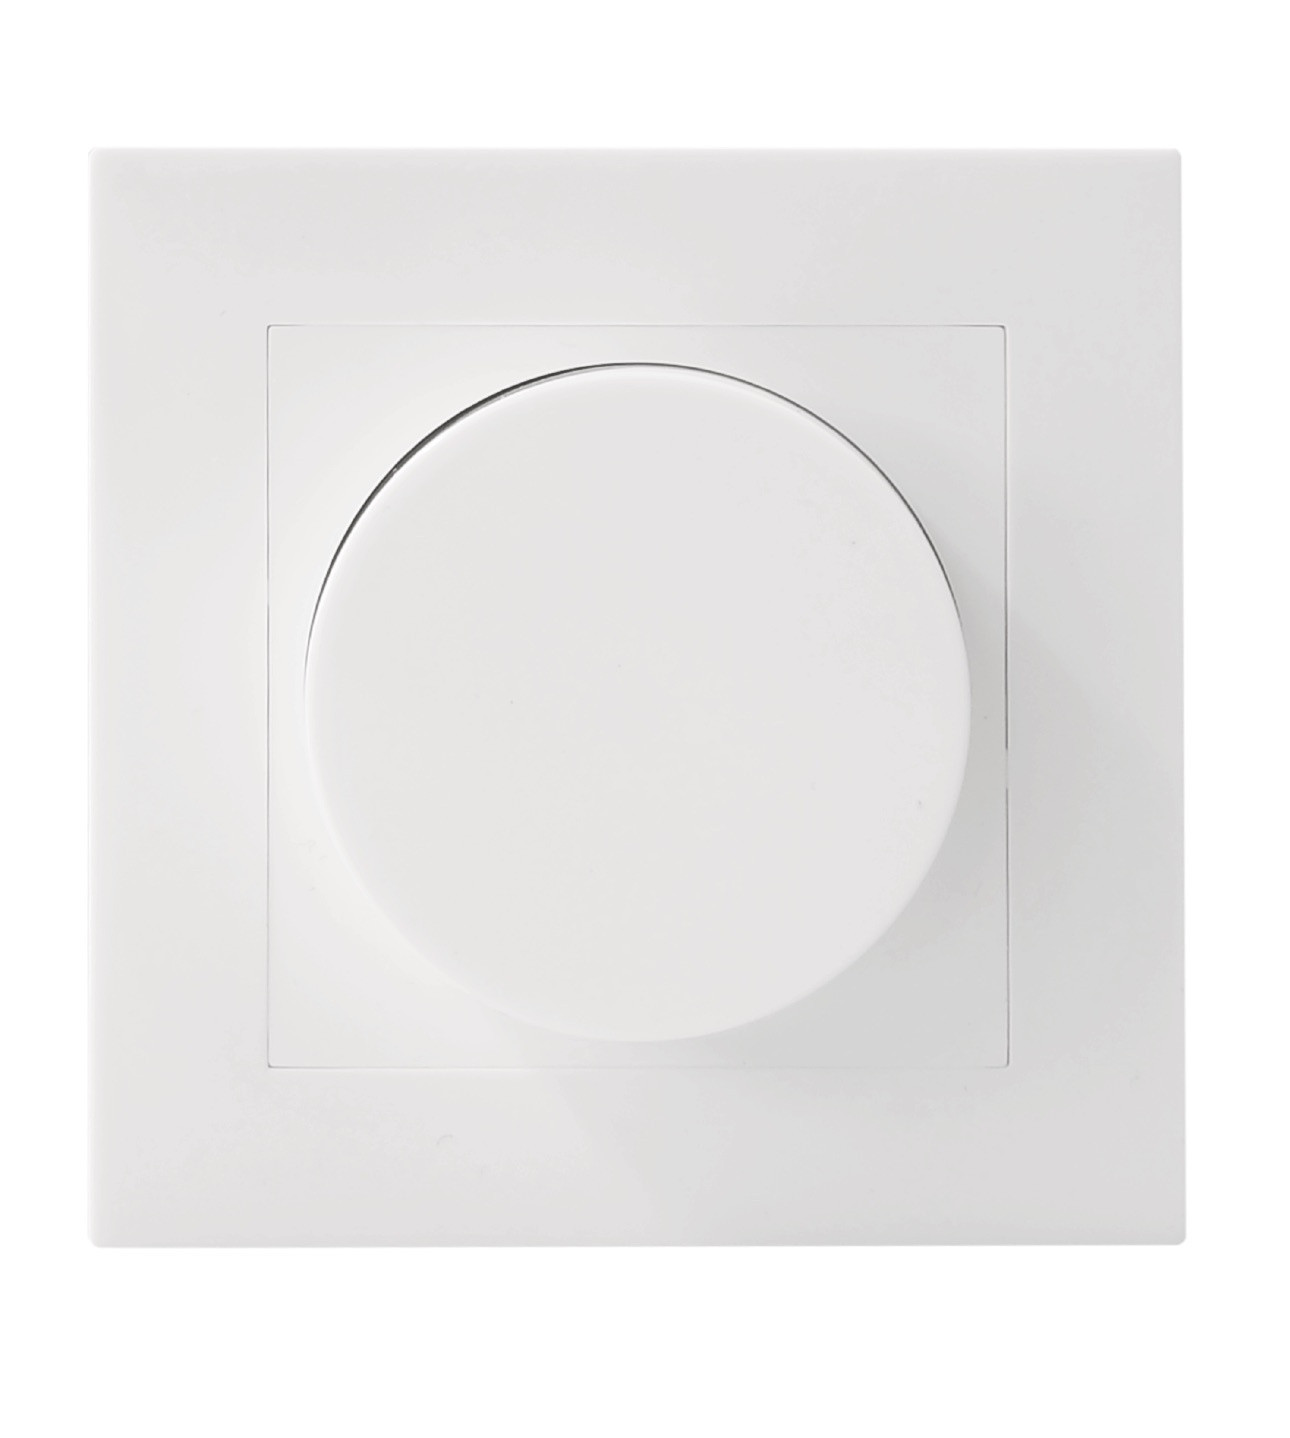 Lucide LED dimmer Fase aansnijding RL 5-150W /Fase afsnijding RC 5-300W Wit